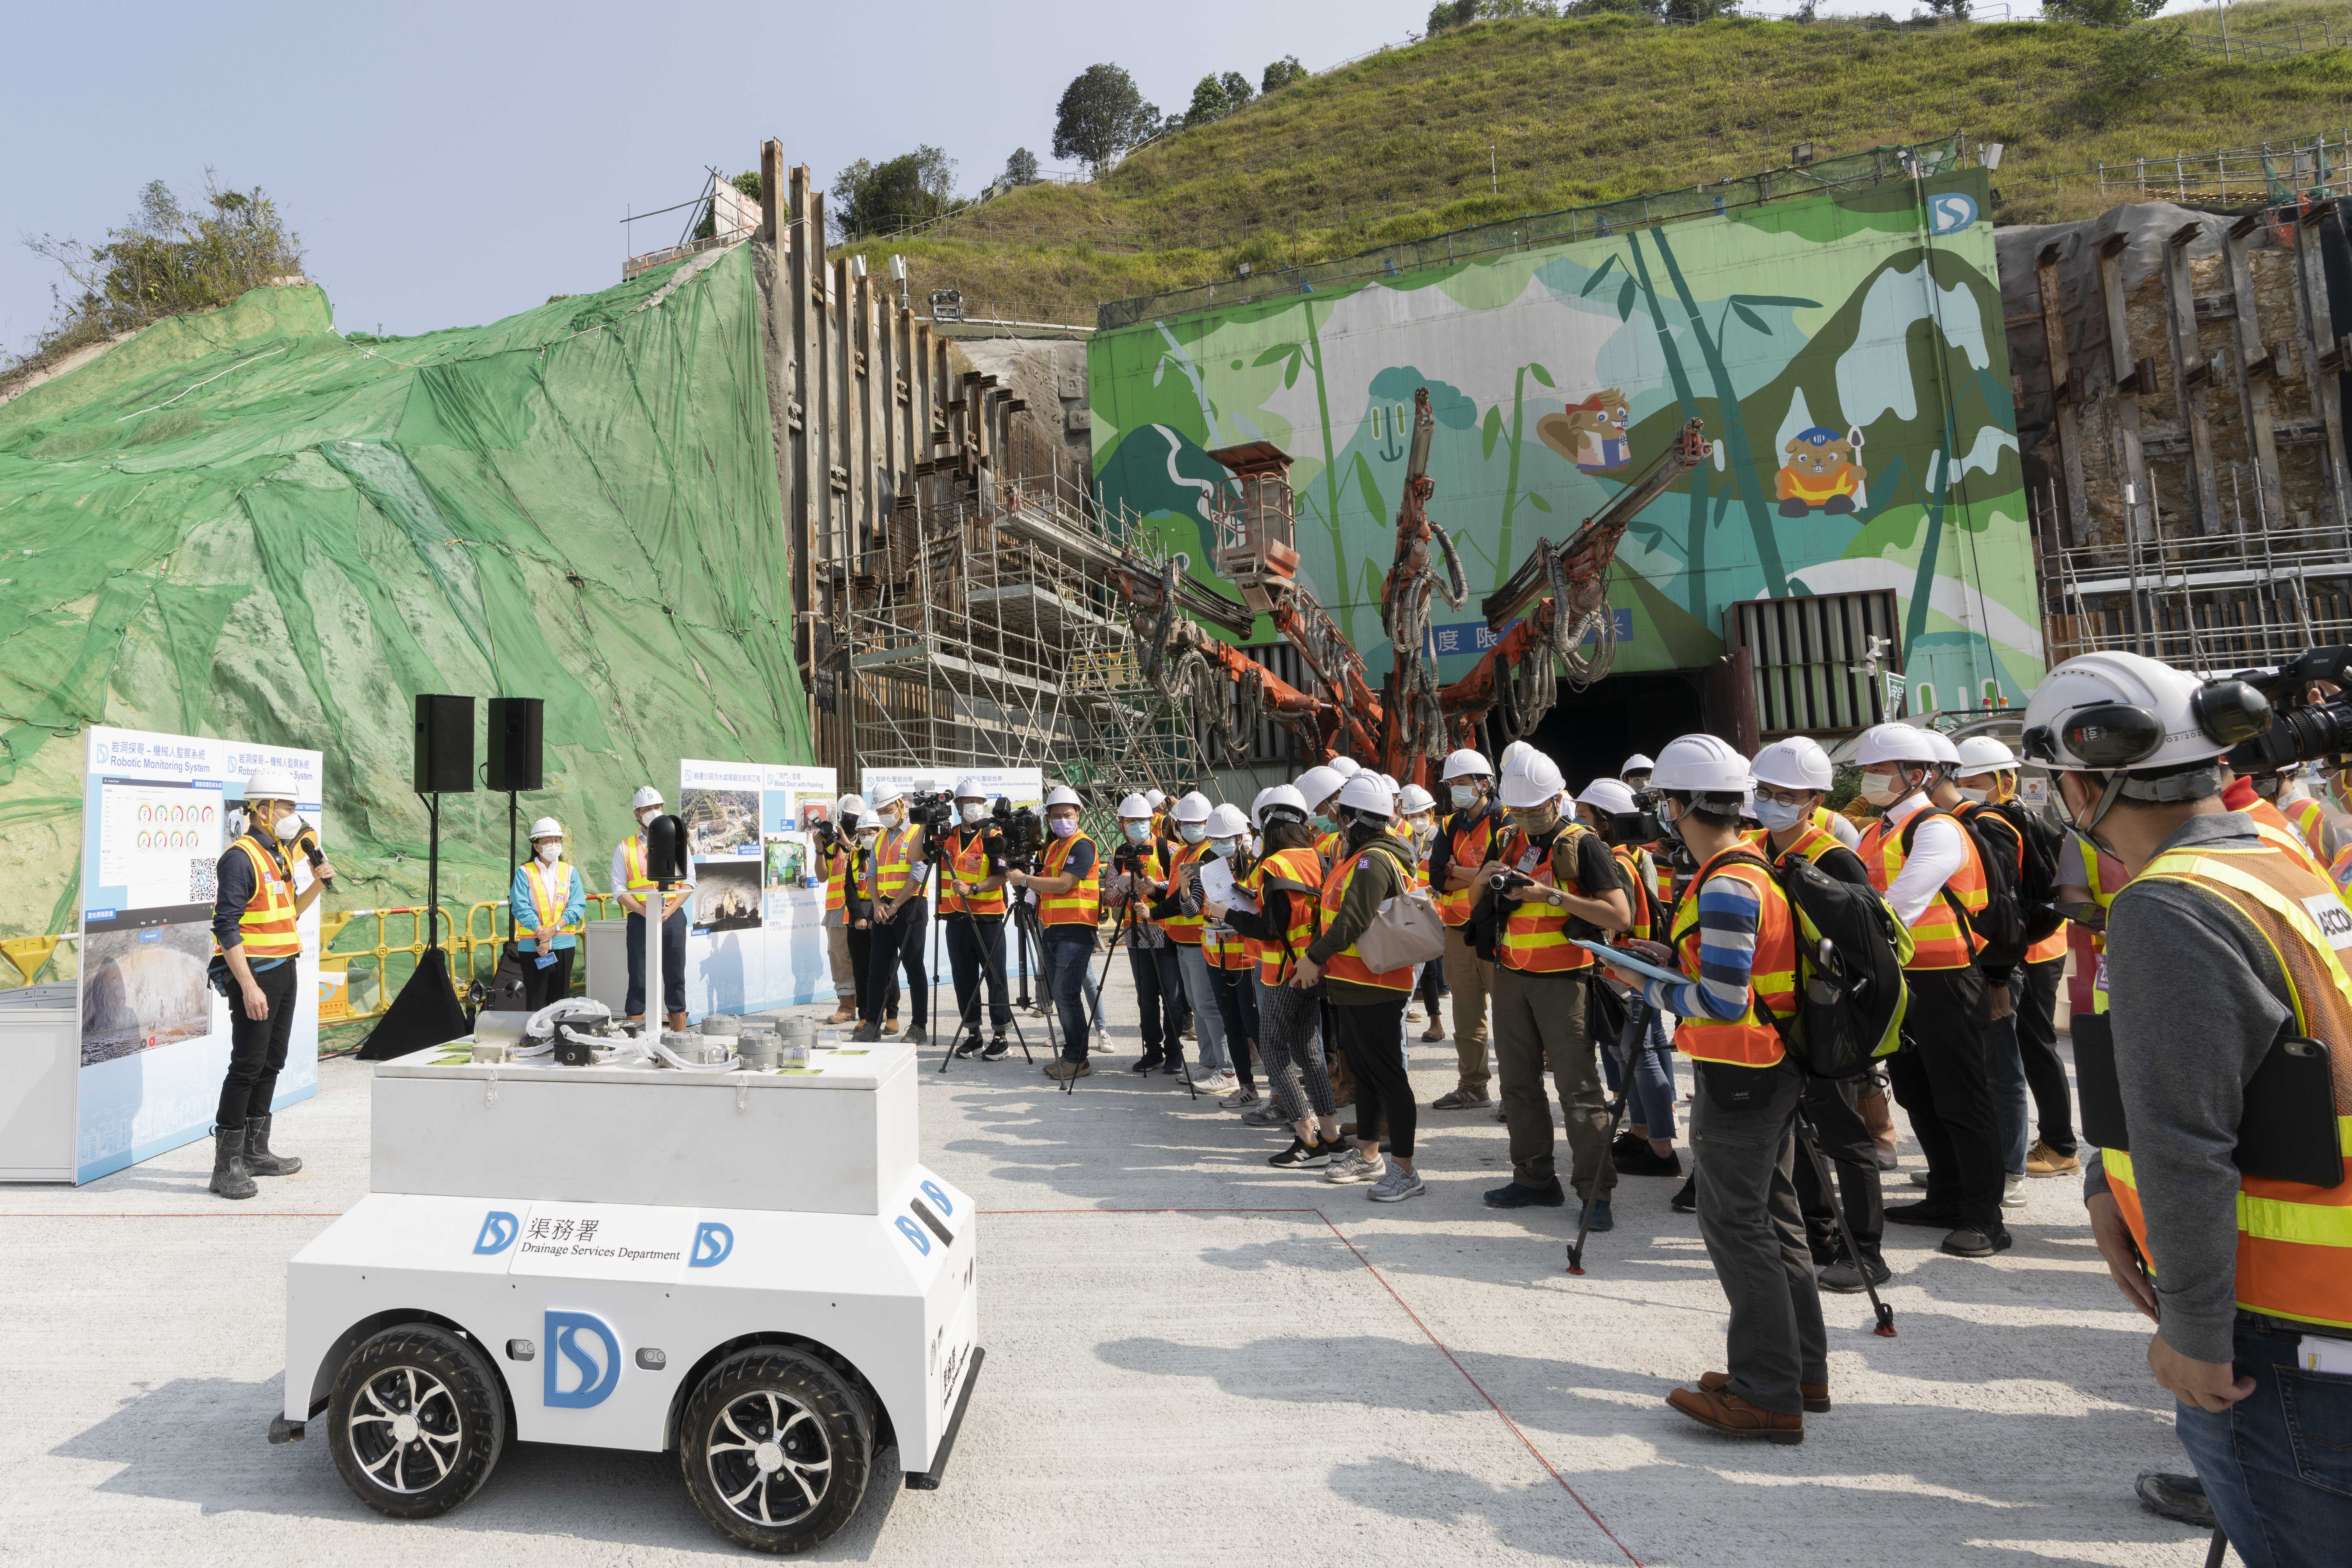 The media visit the works site of the “Relocation of Sha Tin Sewage Treatment Works to Caverns” project to learn more about its works progress and application of new technologies